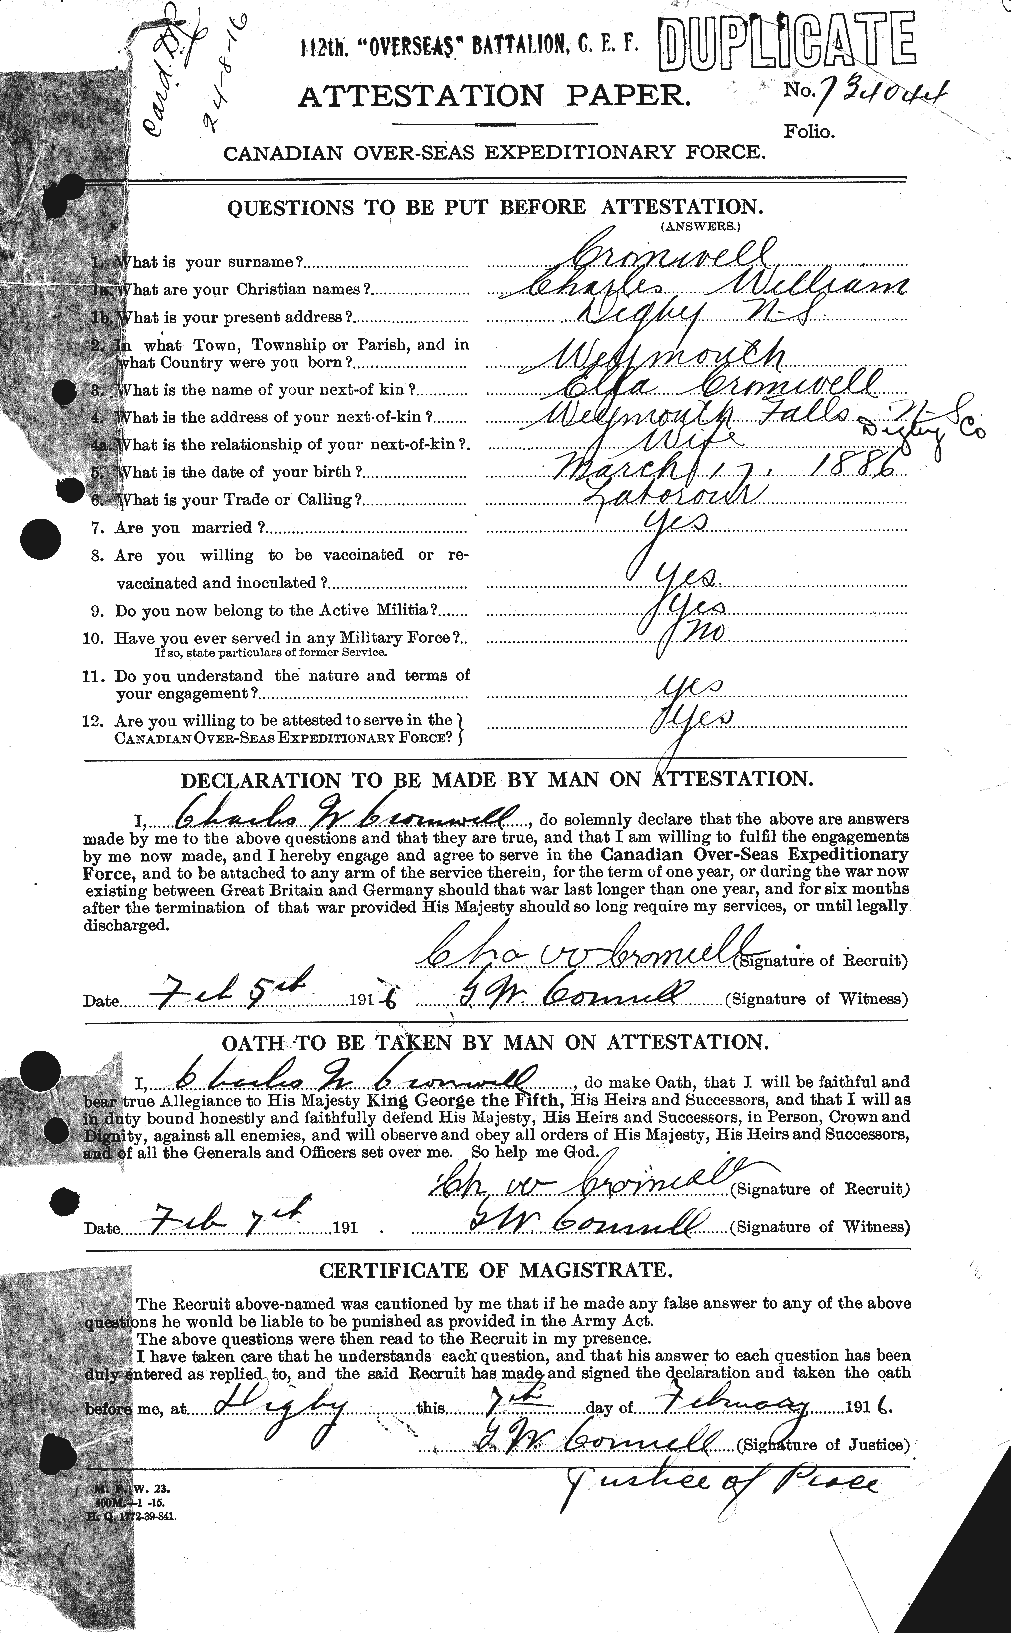 Personnel Records of the First World War - CEF 064932a